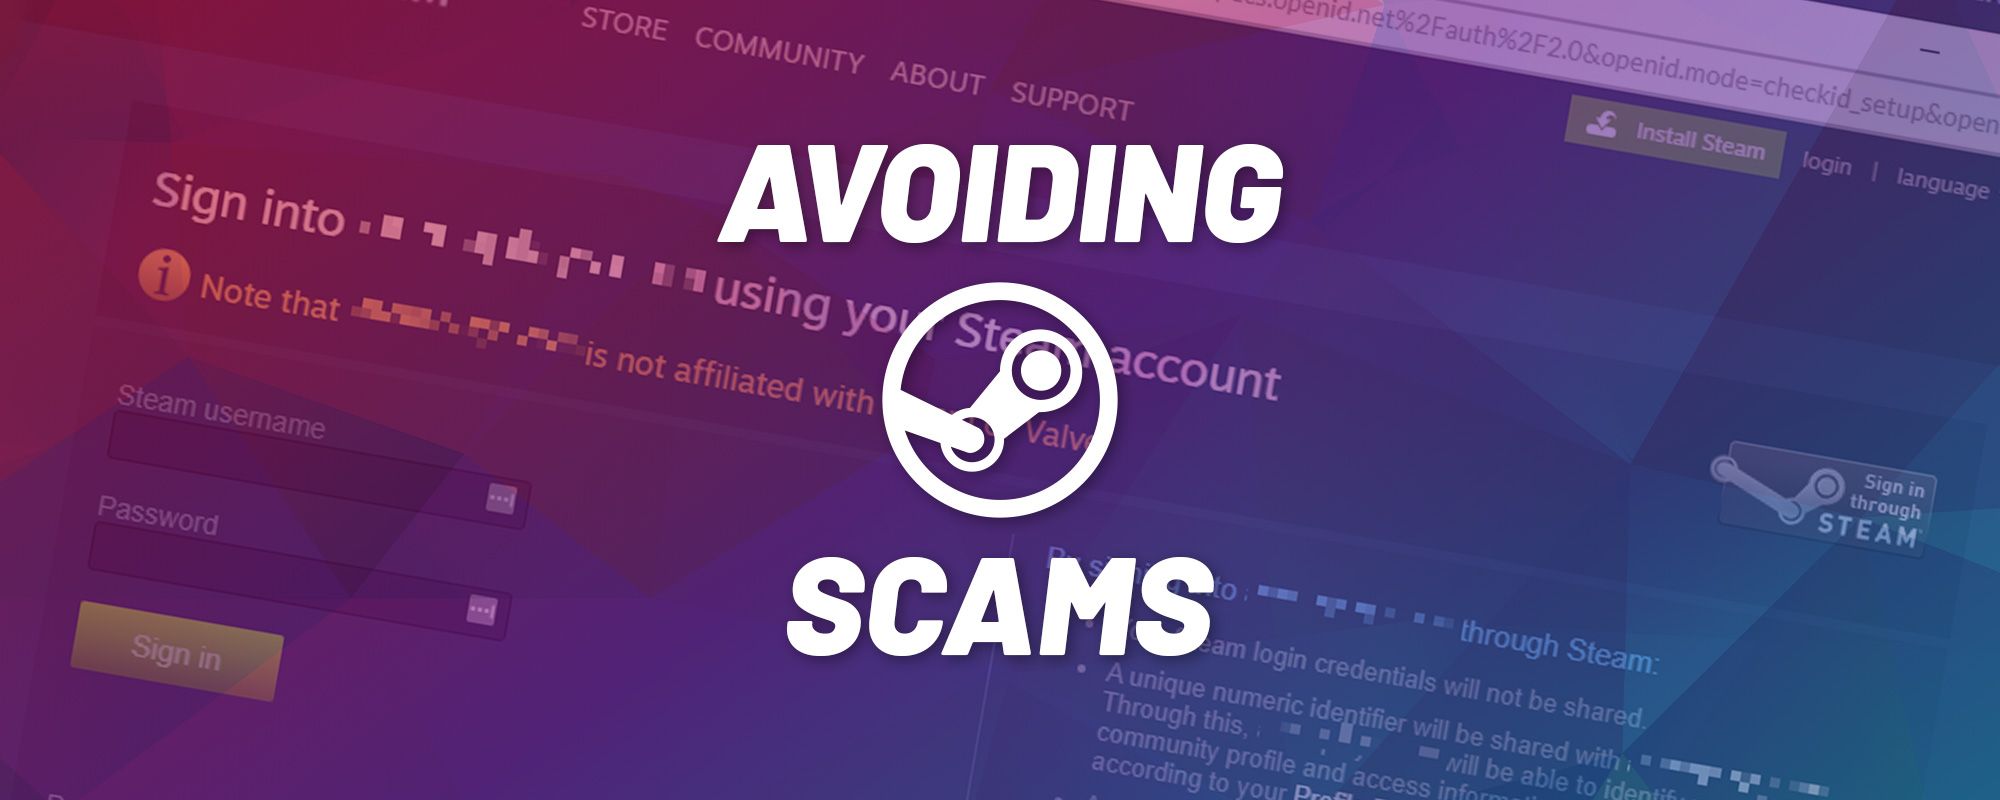 Avoiding Scams Designed to Steal Your Steam Account